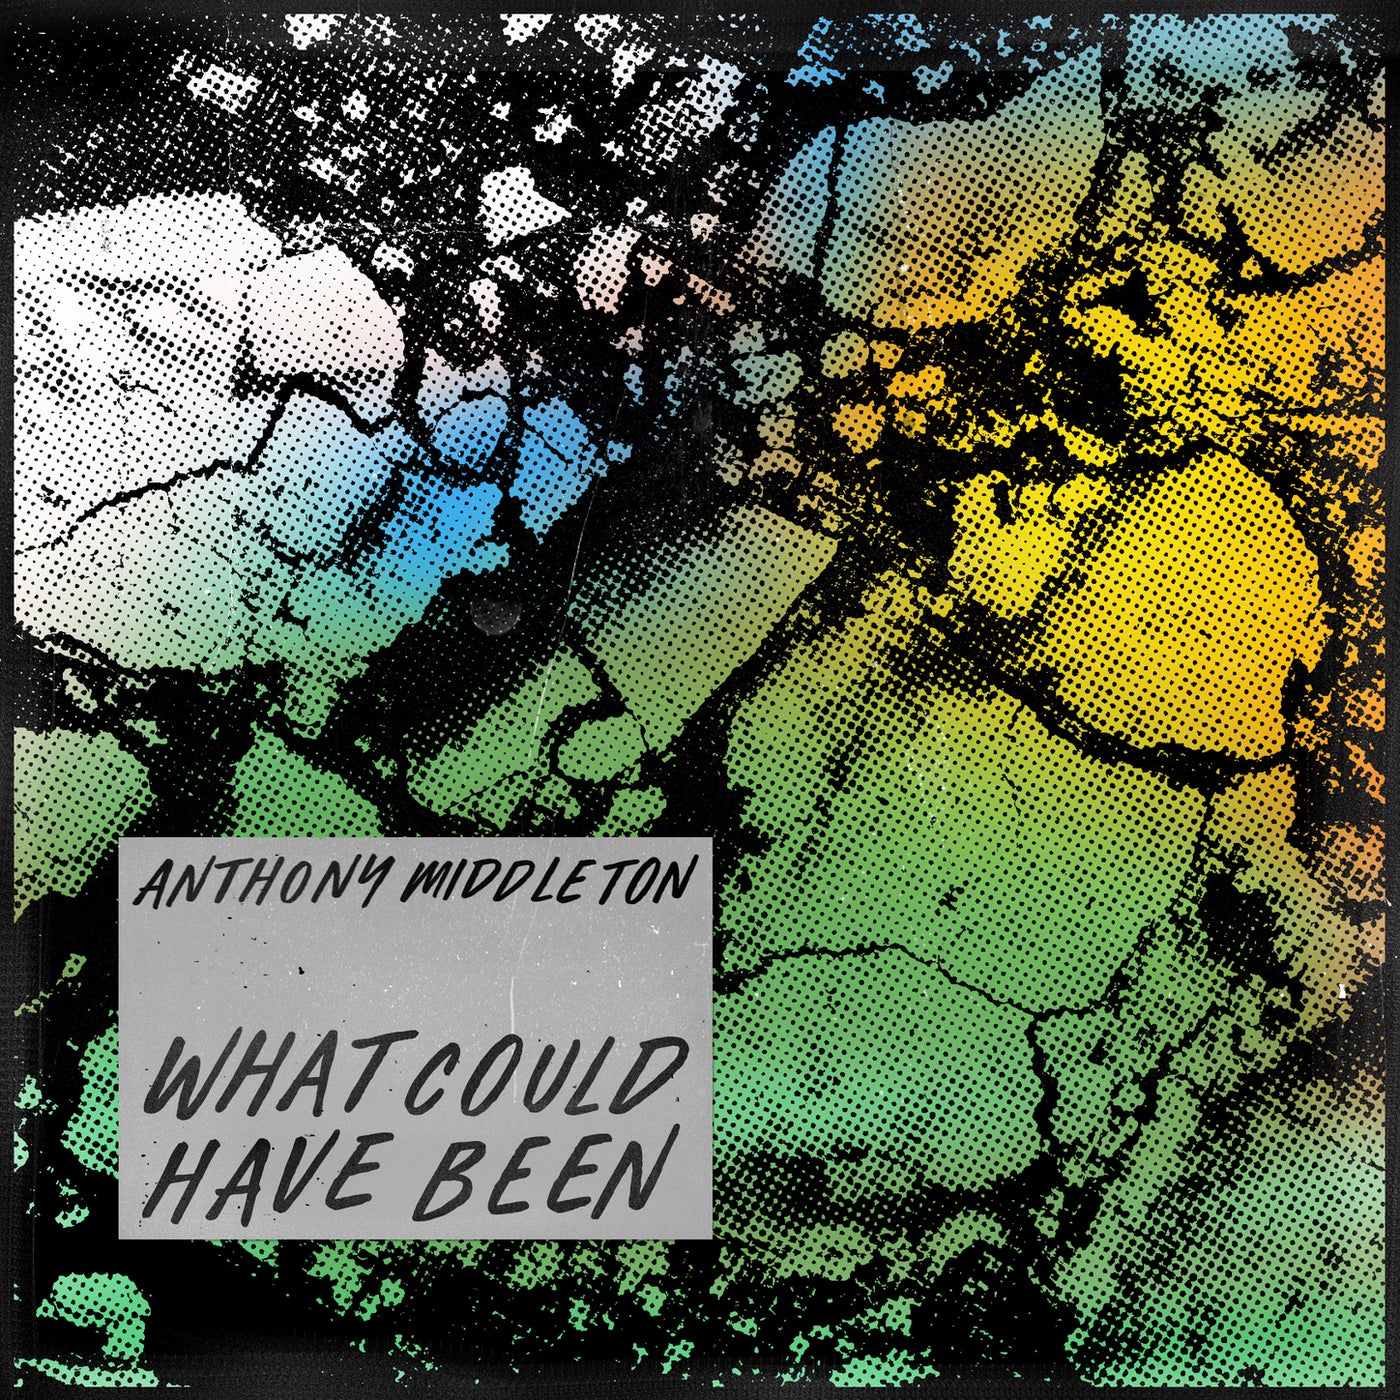 image cover: Anthony Middleton - What Could Have Been / GPM624